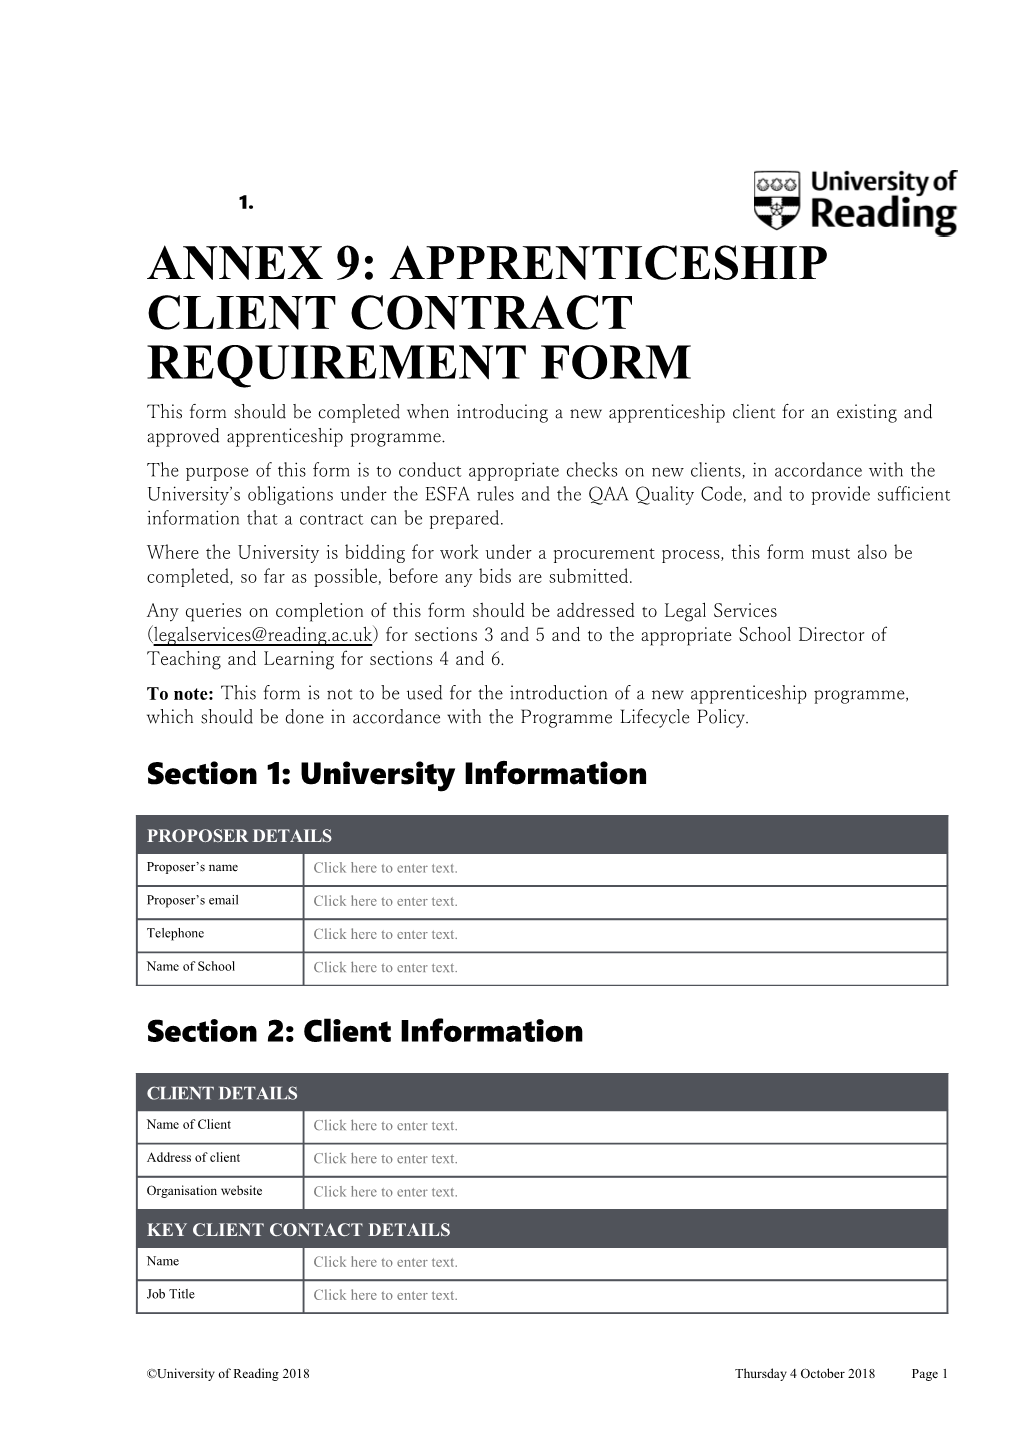 Apprenticeship Client Contract Requirement Form